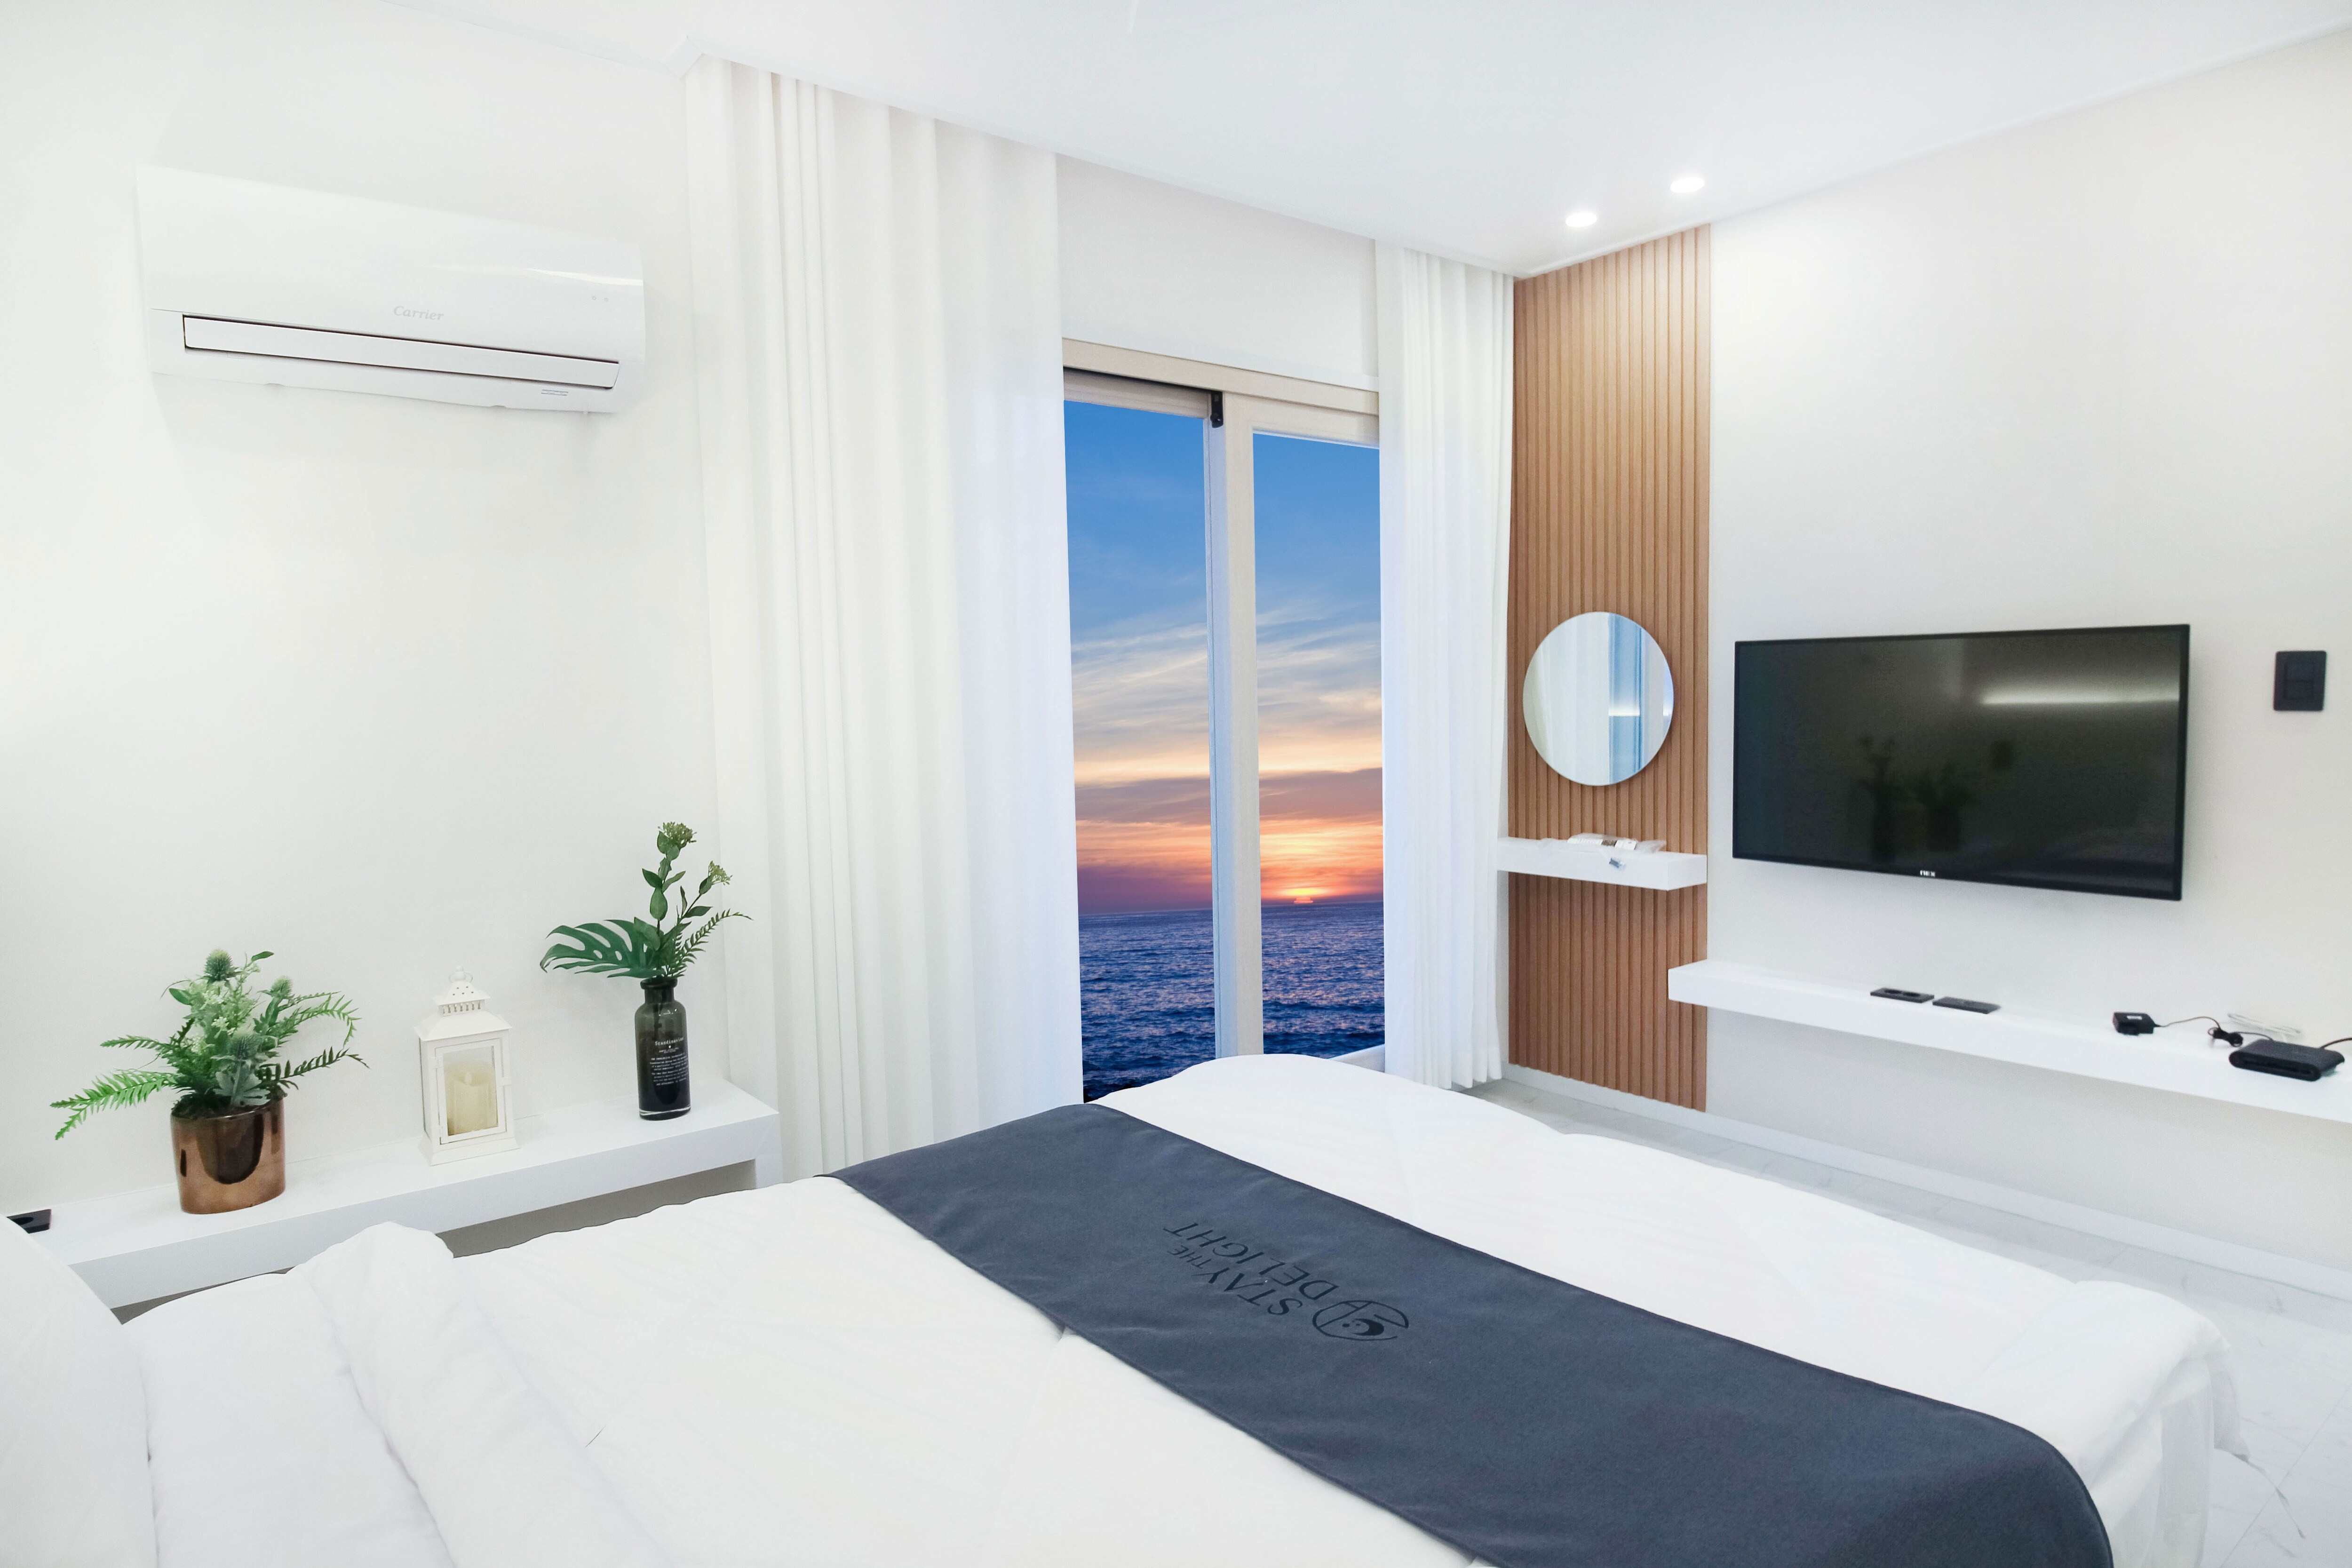 Property Image 2 - Fresh Cheerful Apartment with Ocean Views 4 